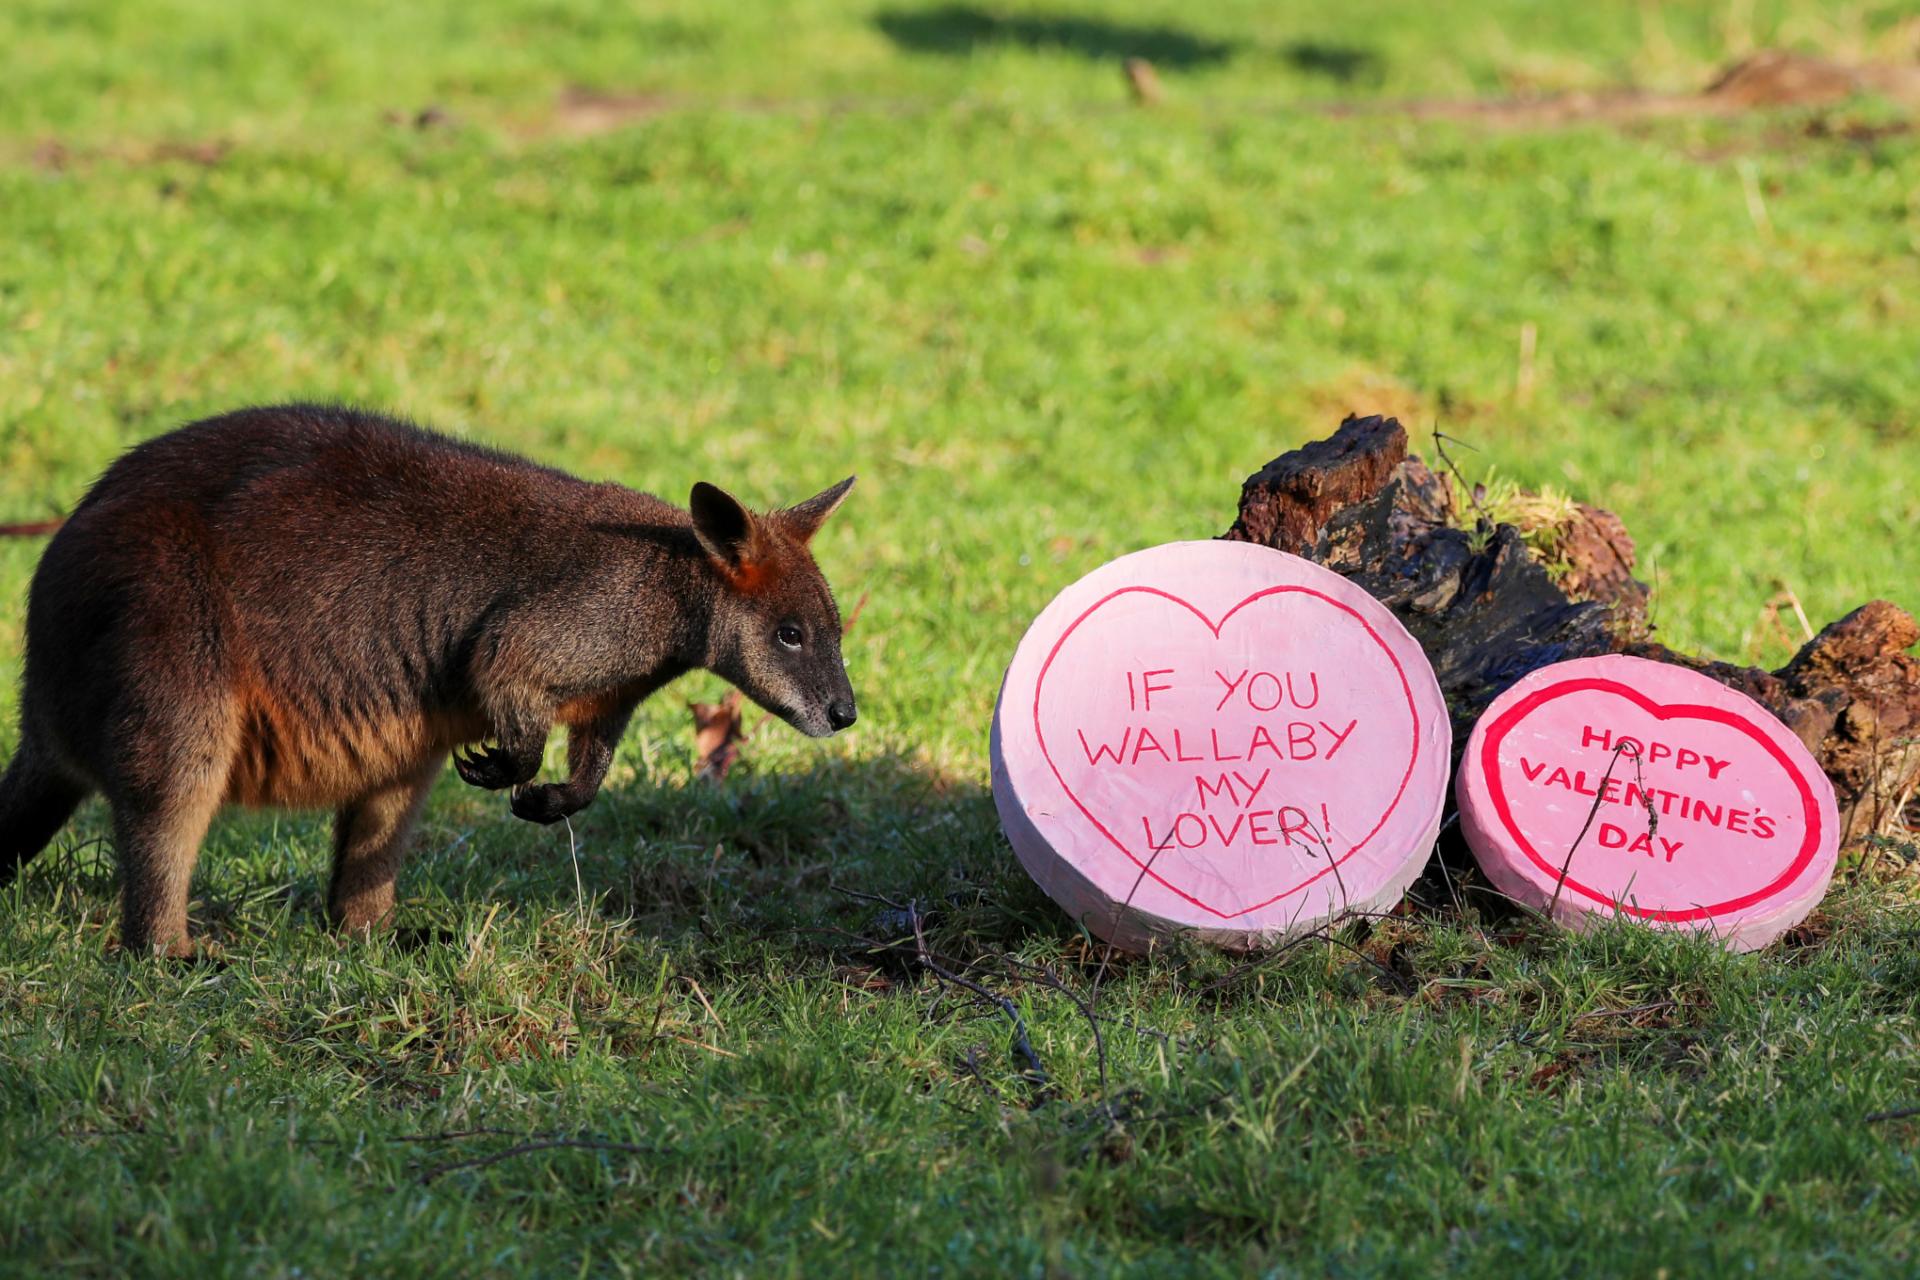 Wallaby looking at pink Valentine's Day enrichment with funny slogans 

IMAGE: Allie McGregor (2024)